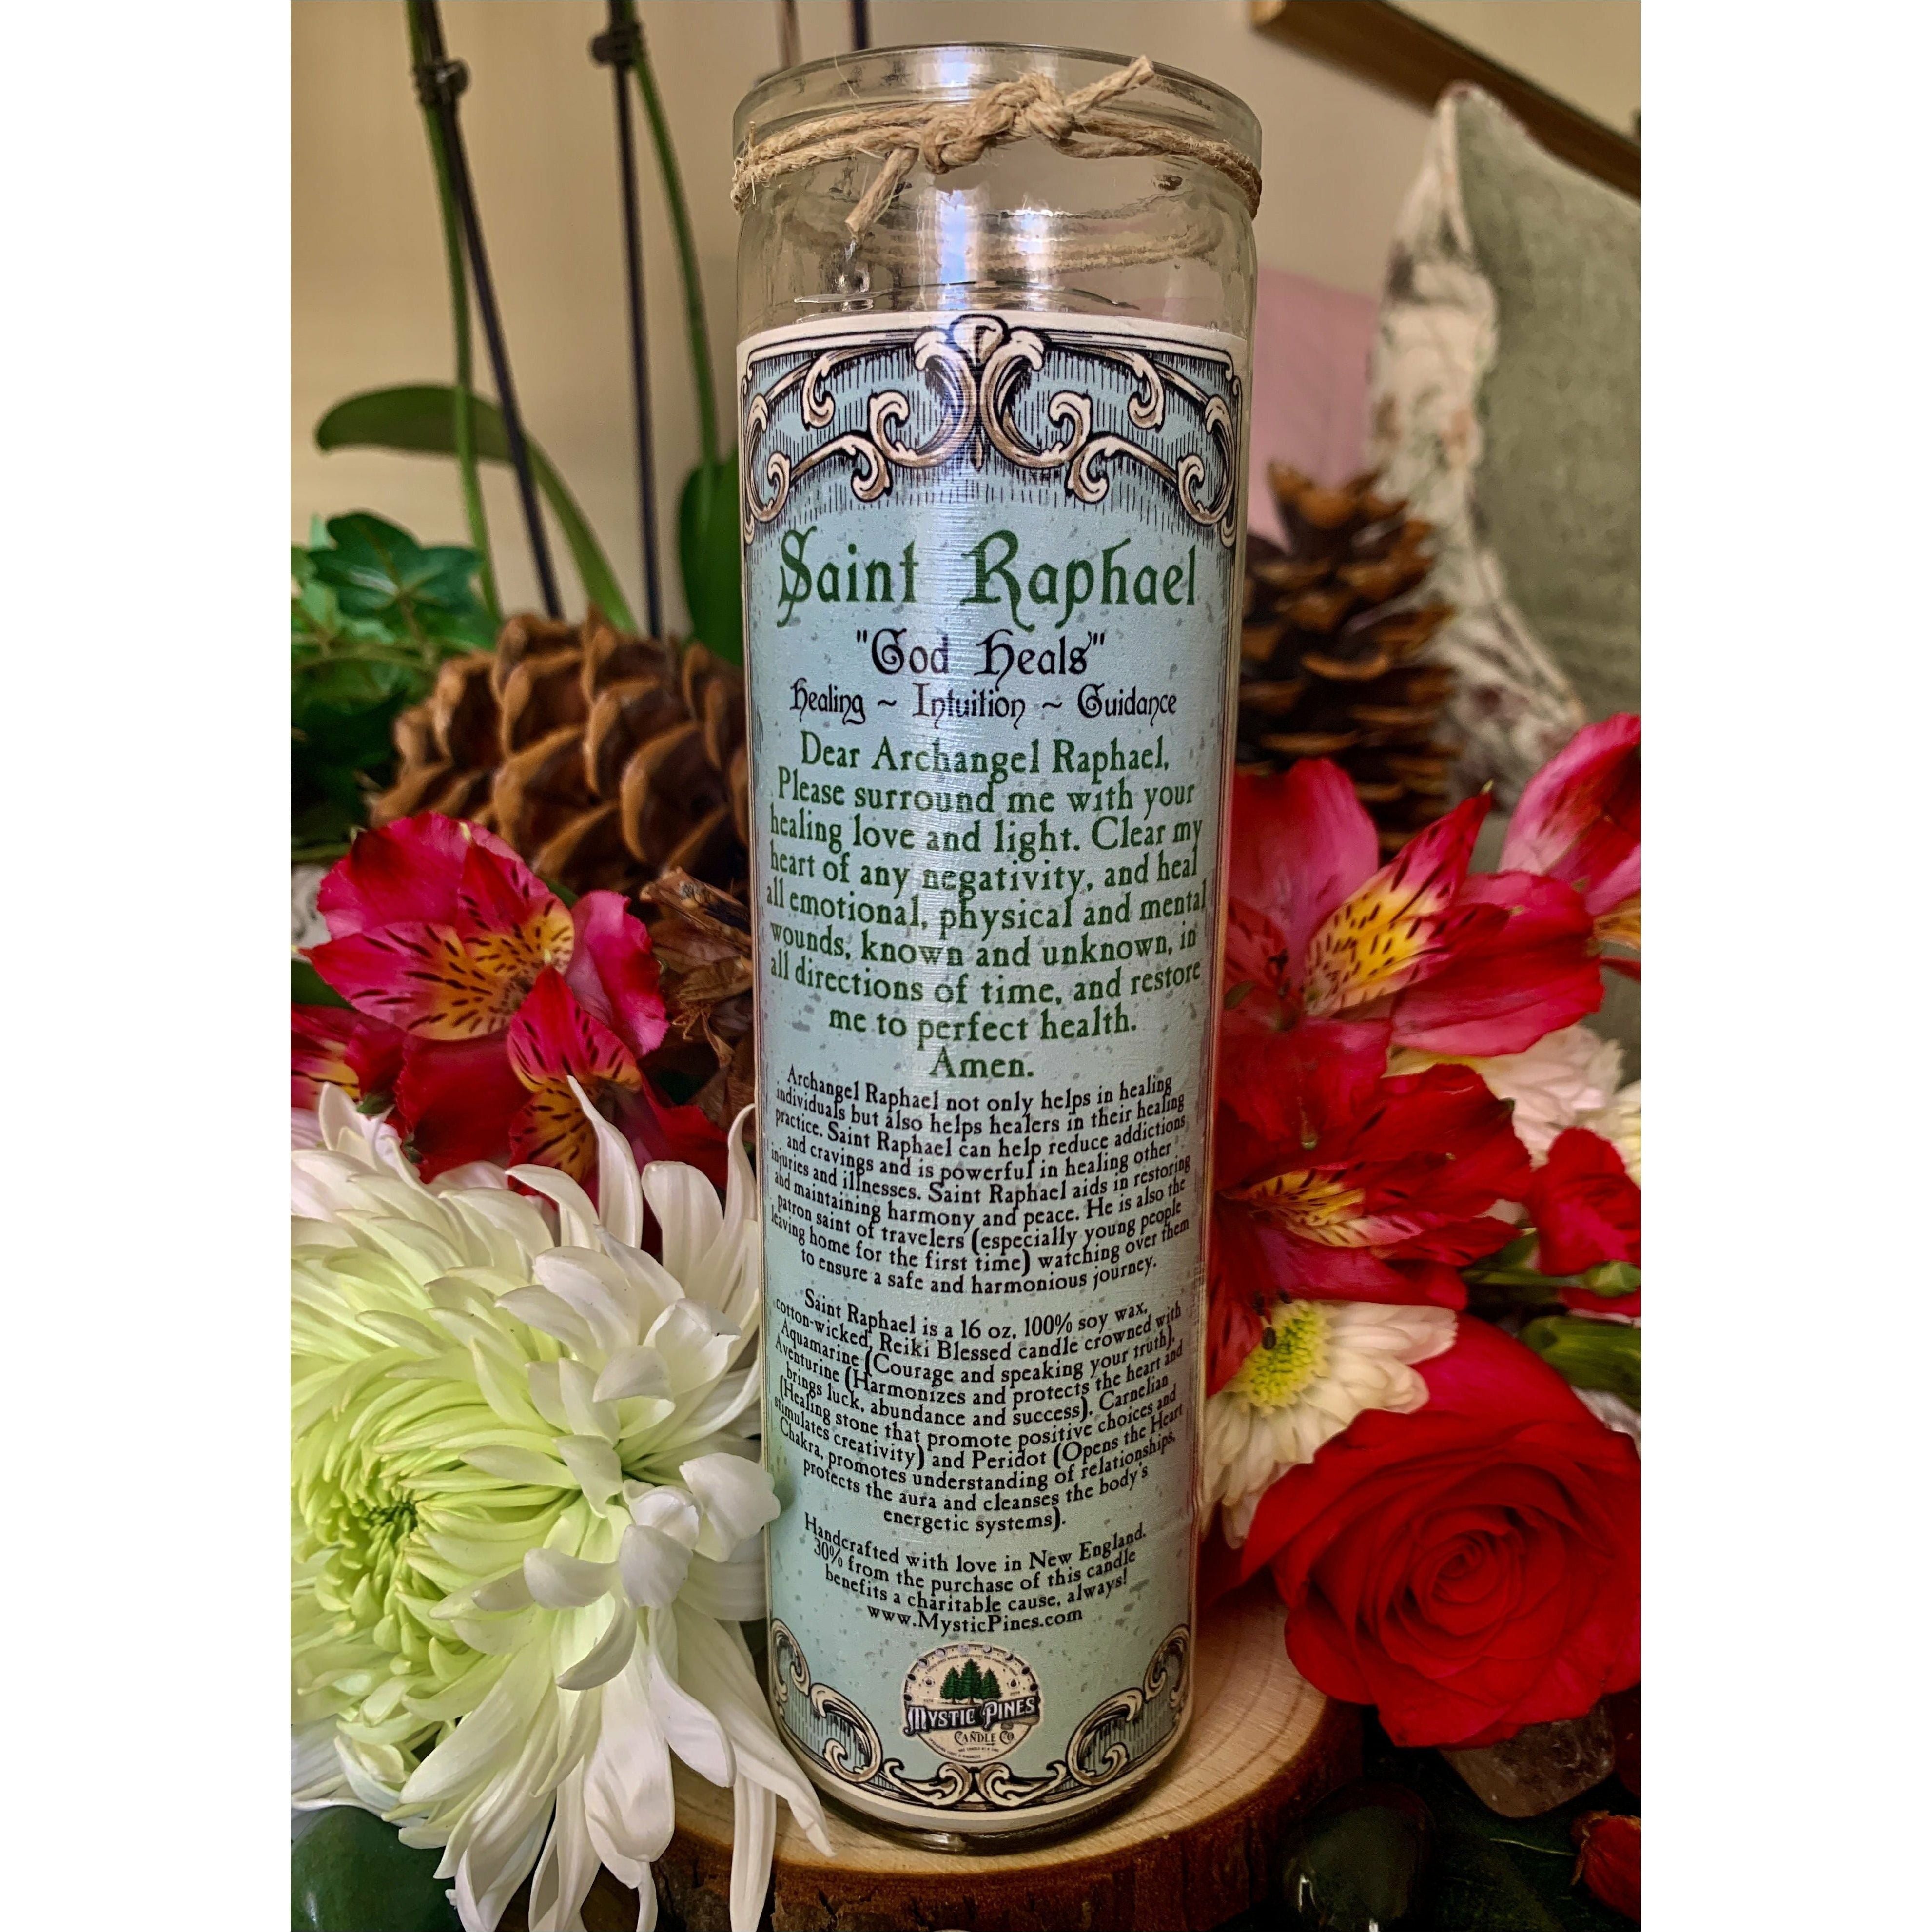 A prayer for healing will be found on the reverse side of our Archangel Saint Raphael candle.